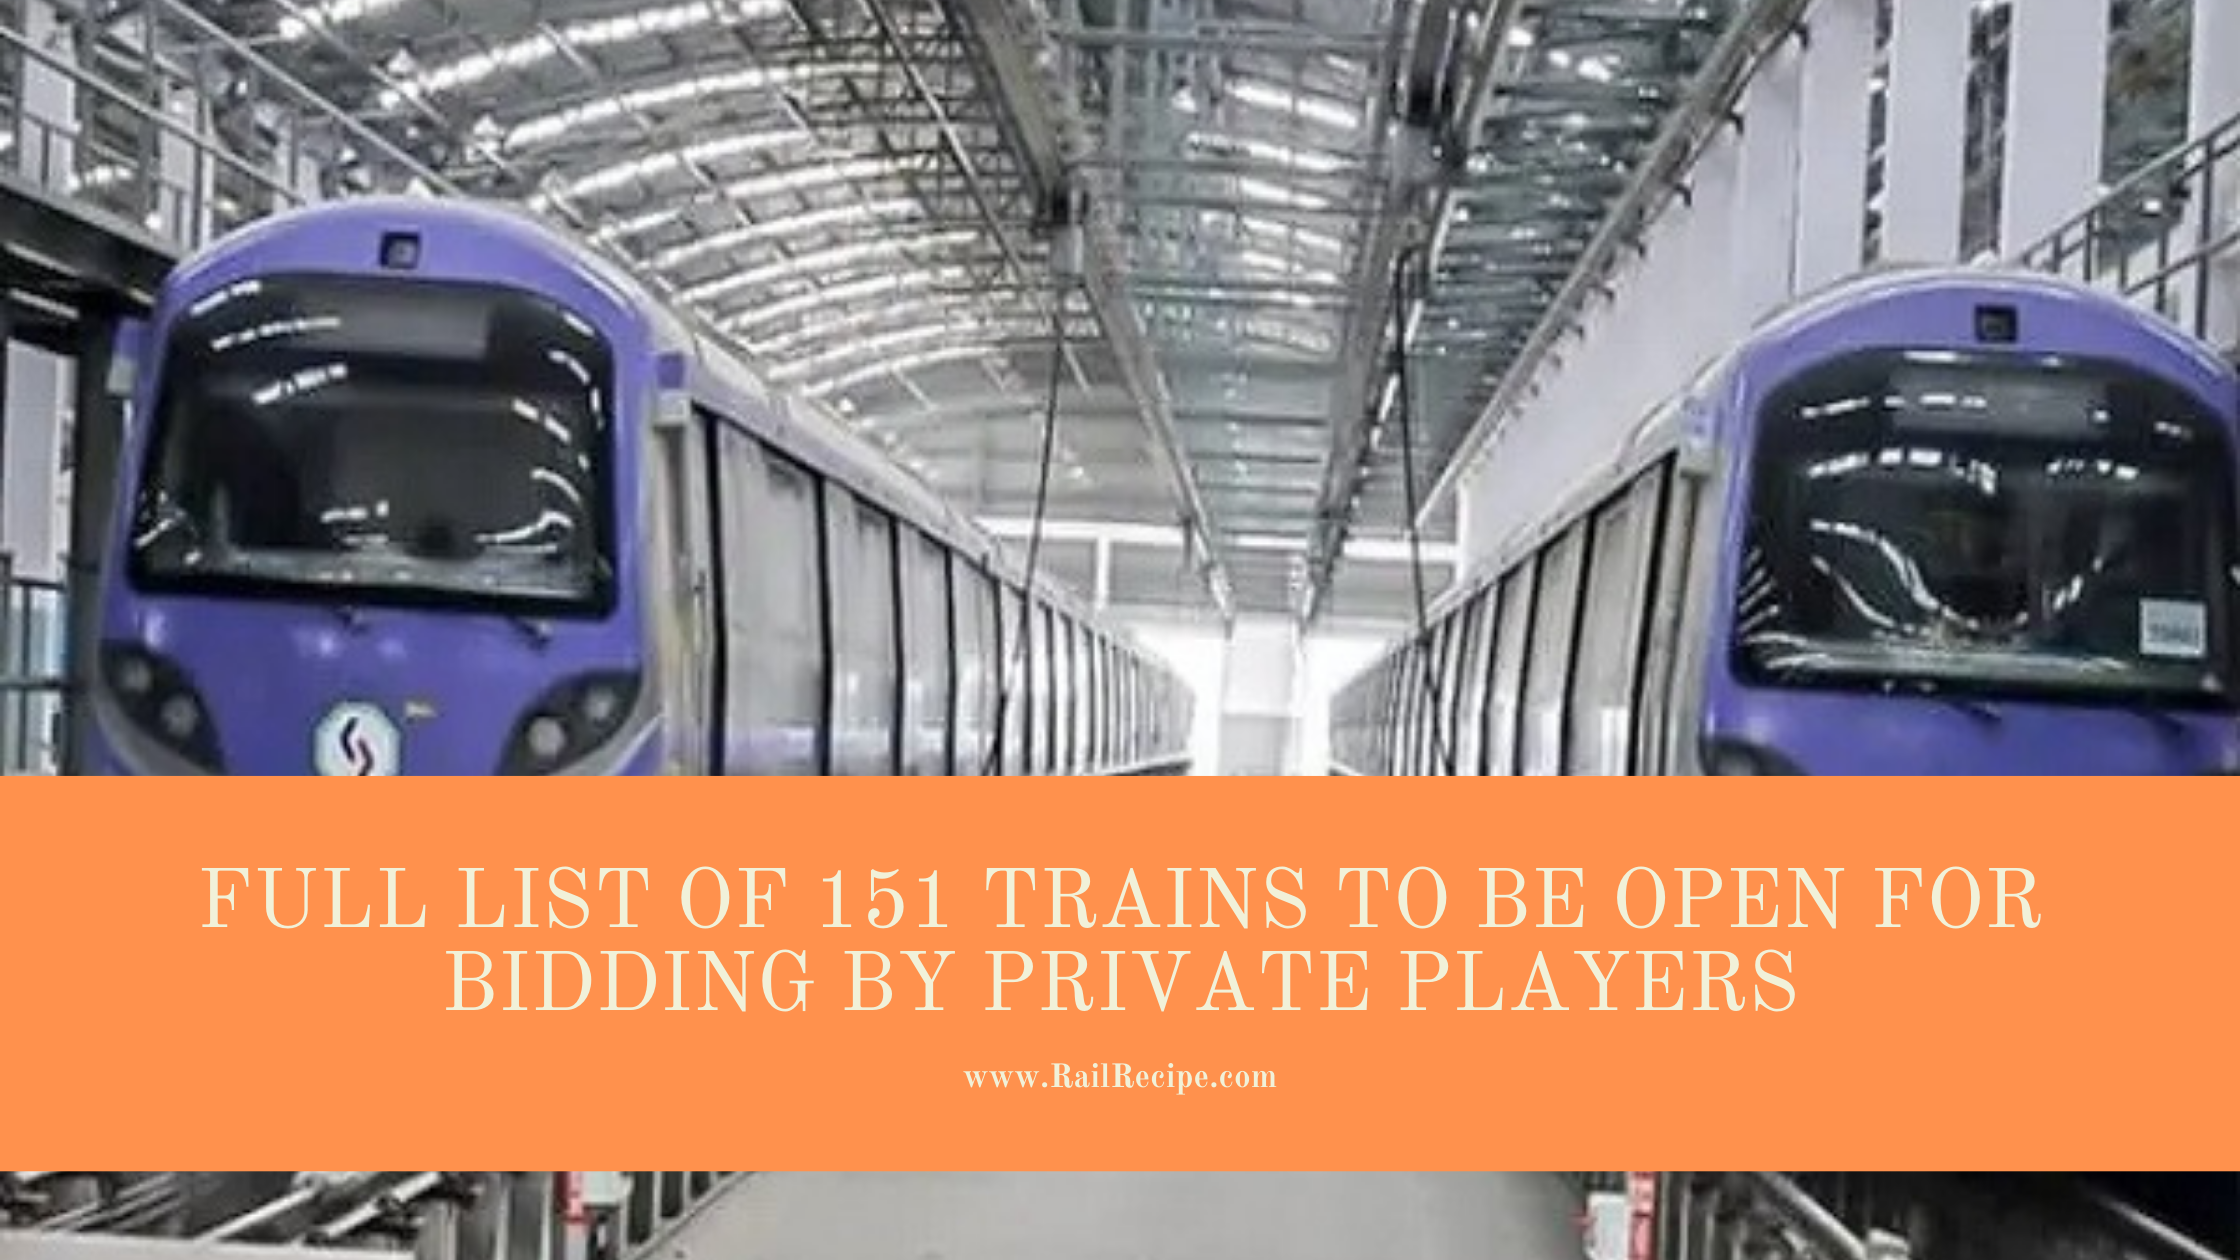 Full List of 151 Trains to Be Open For Bidding By Private Players